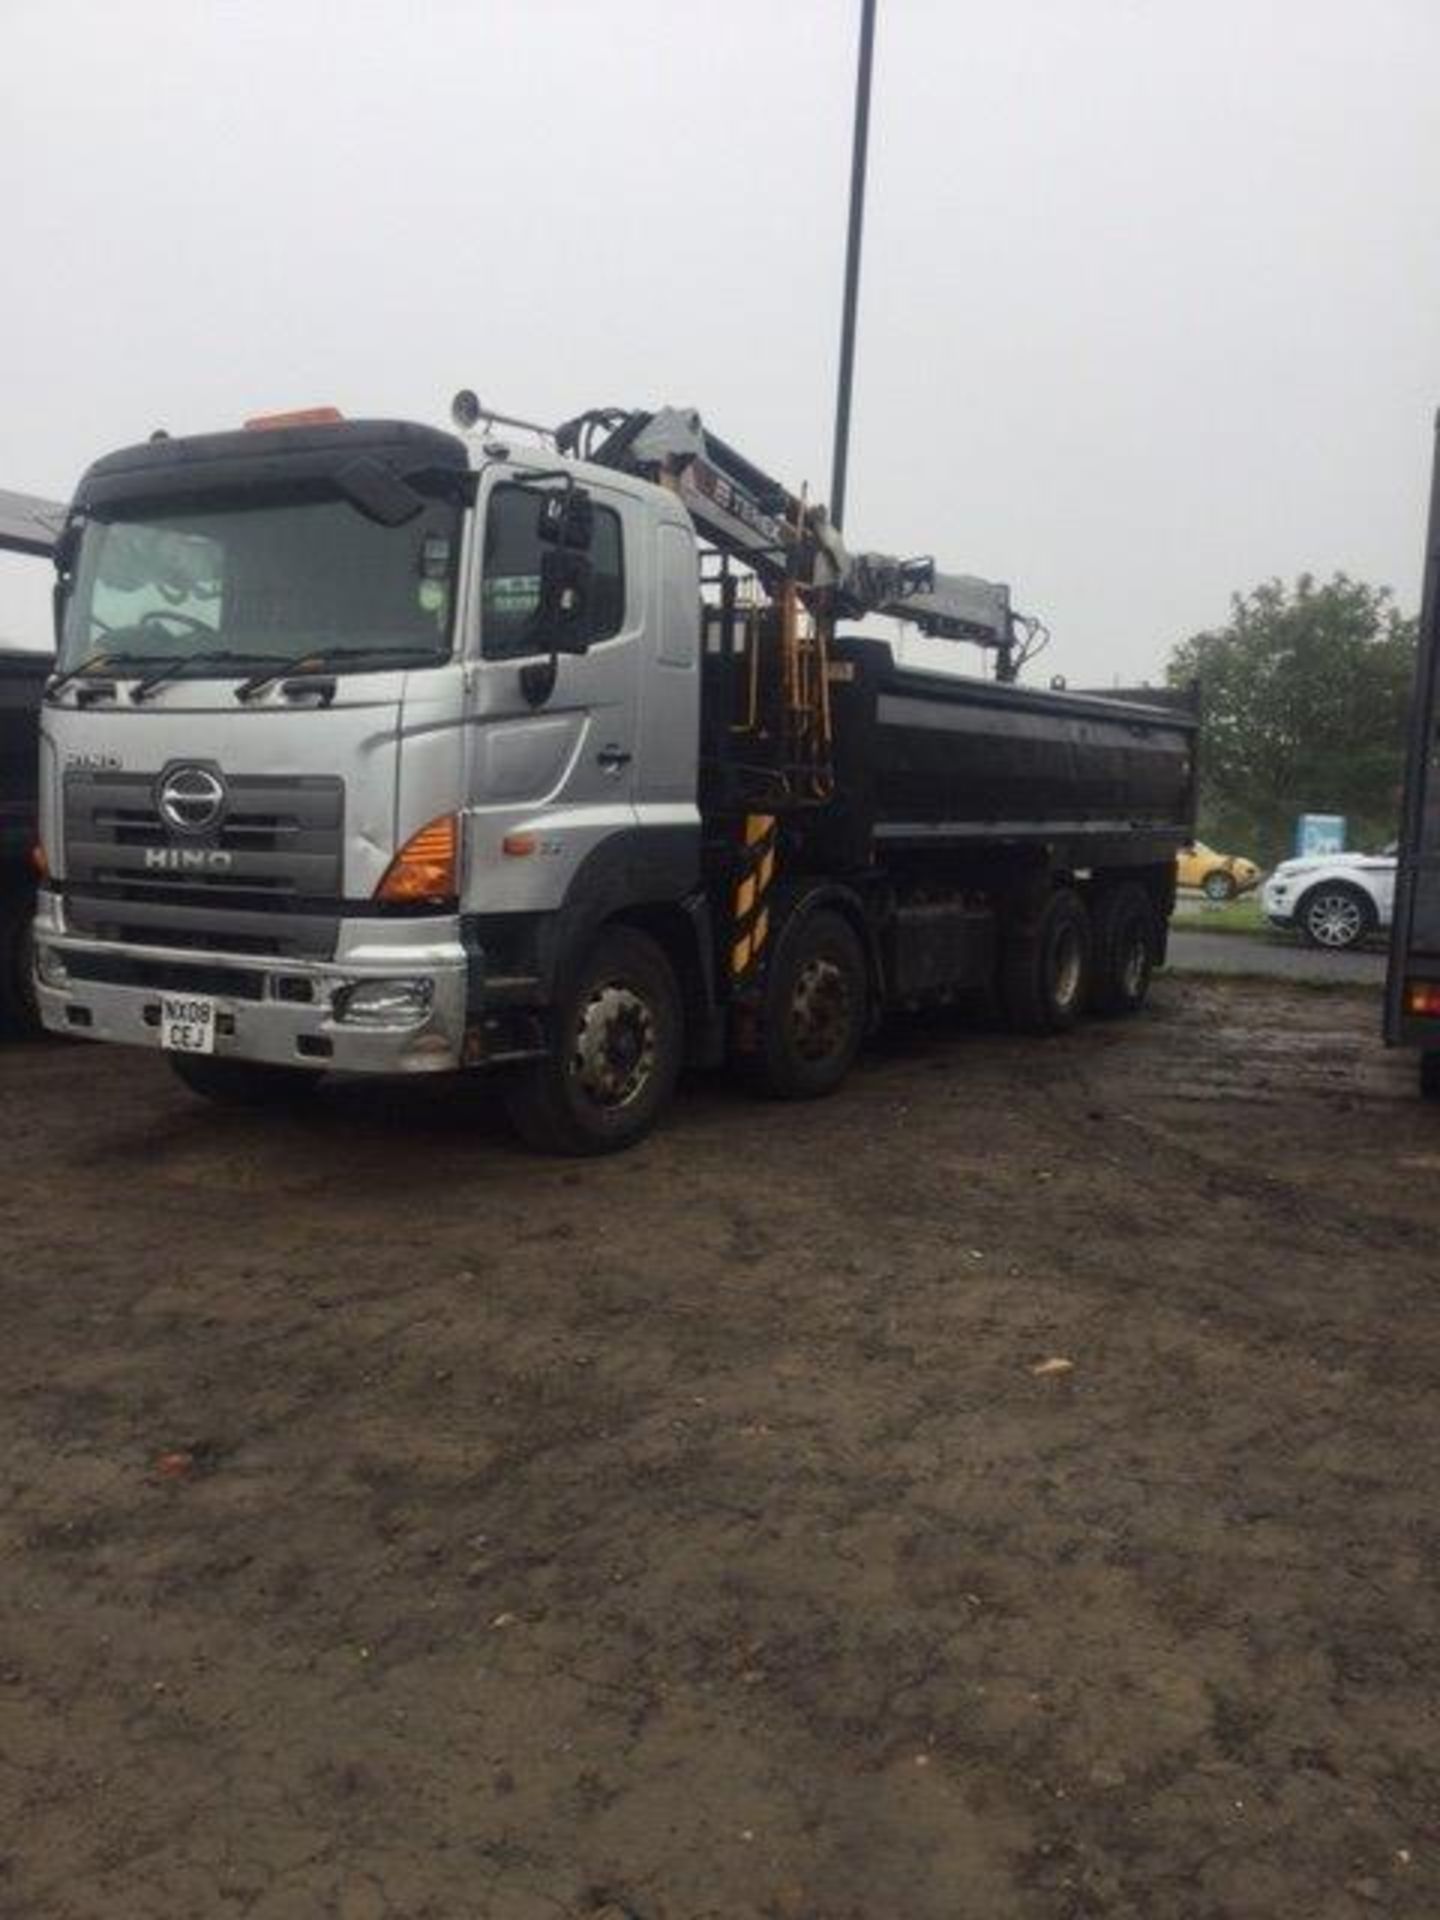 2008 HINO 700 32t 8x4 with Terex 118.2 Crane with clamshell. MOT 2017. 220,000 kilometeres approx - Image 2 of 7